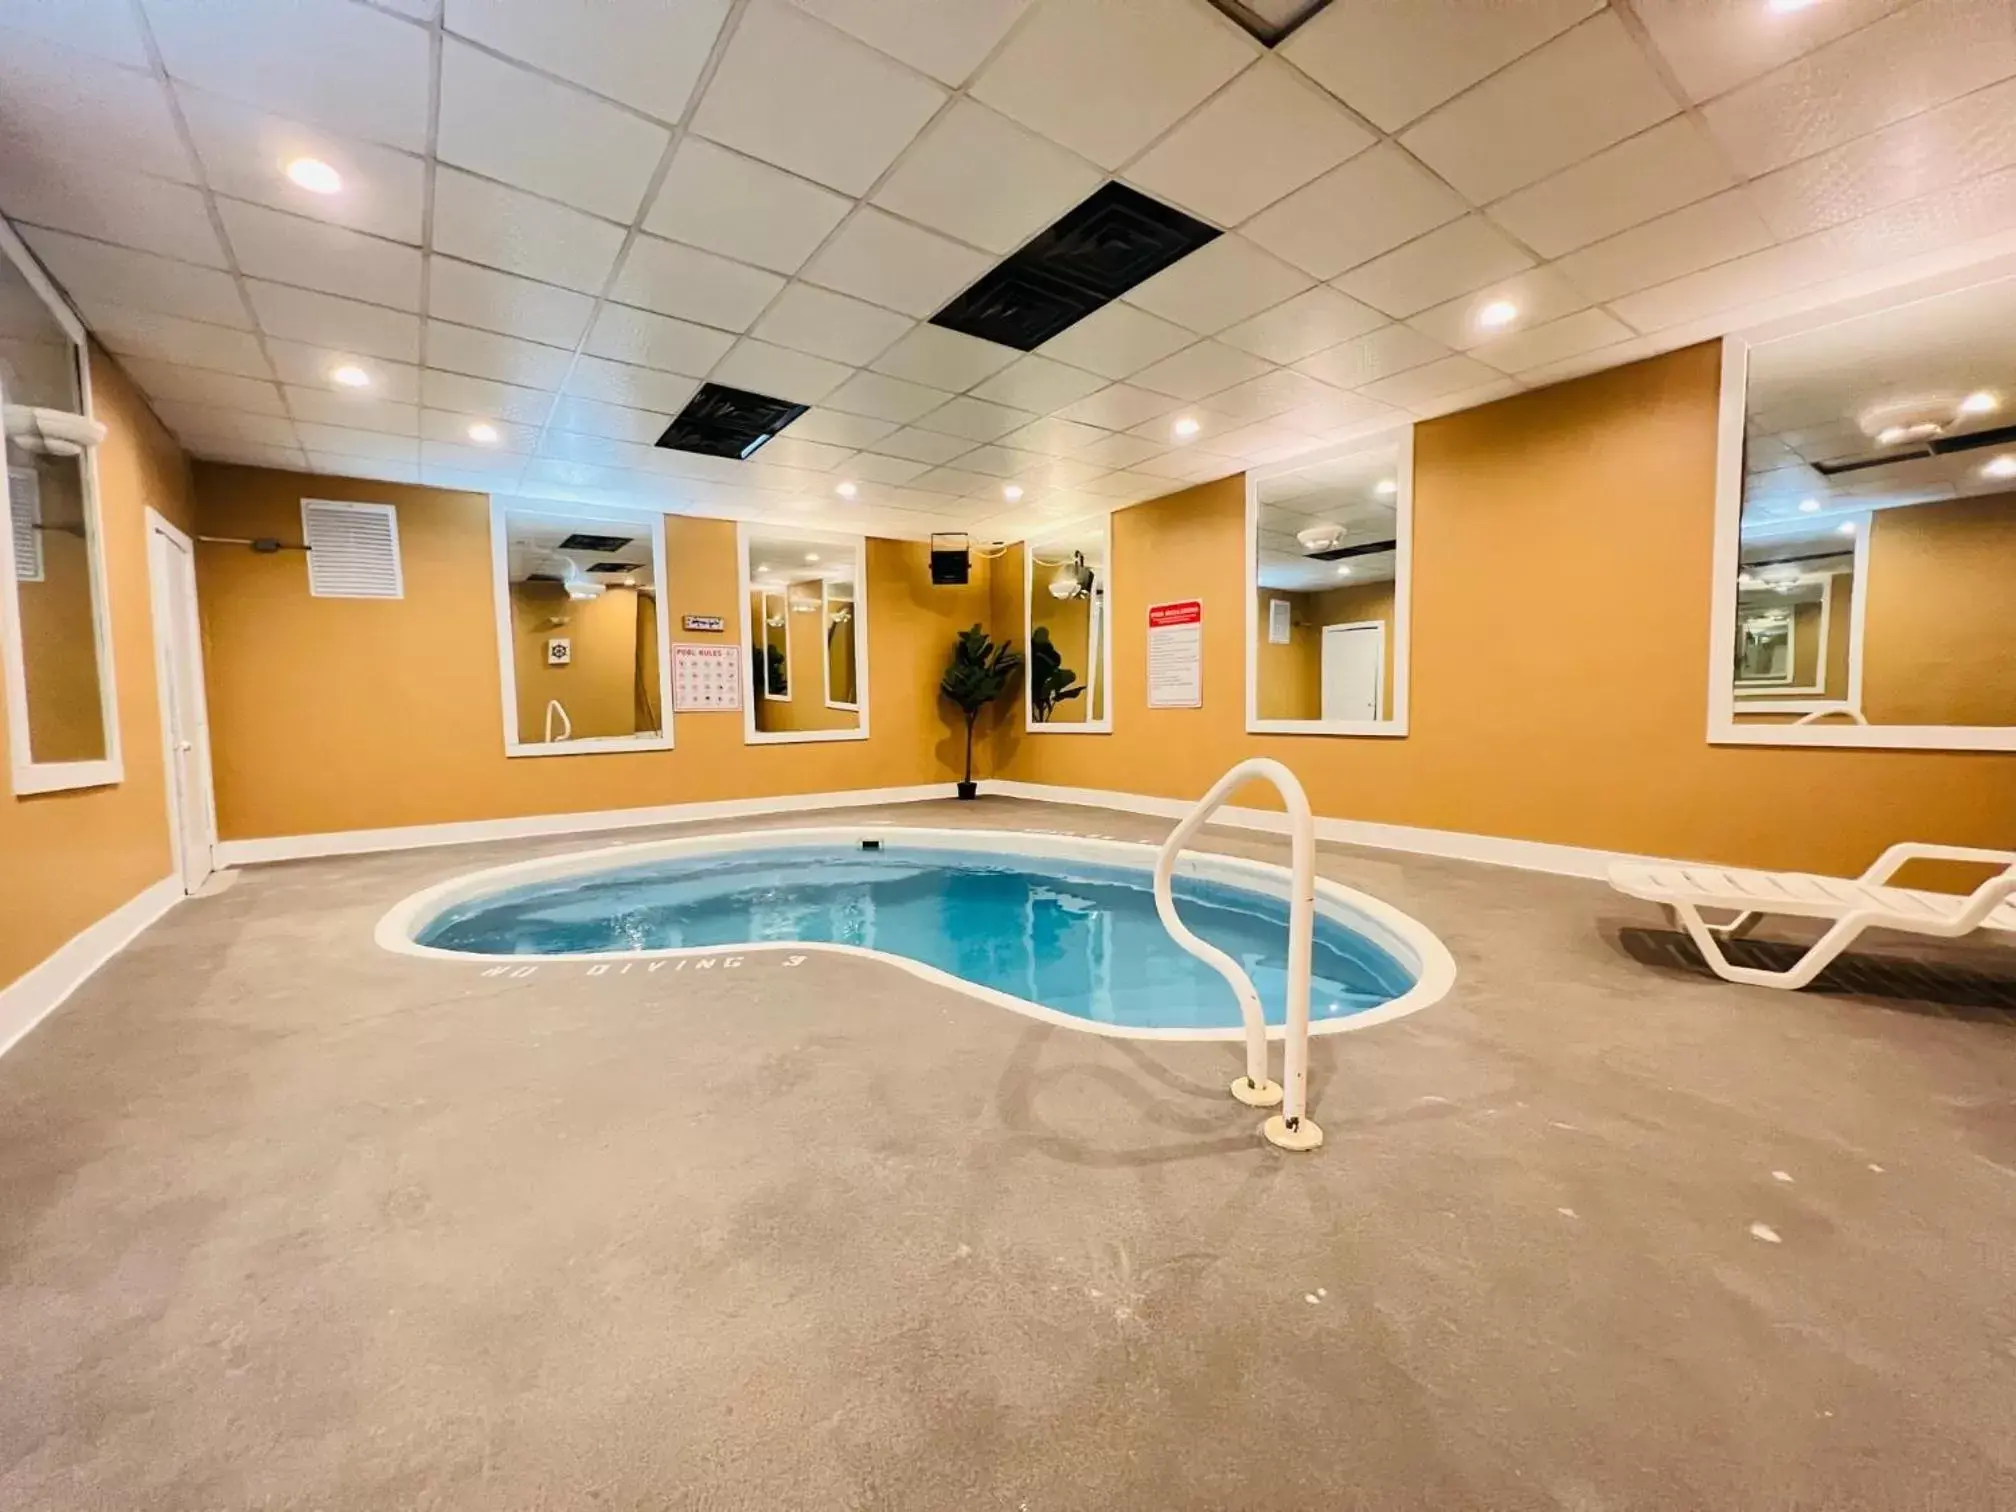 Swimming Pool in Inn of the Dove Romantic Luxury Suites with Jacuzzi & Fireplace at Harrisburg-Hershey, PA